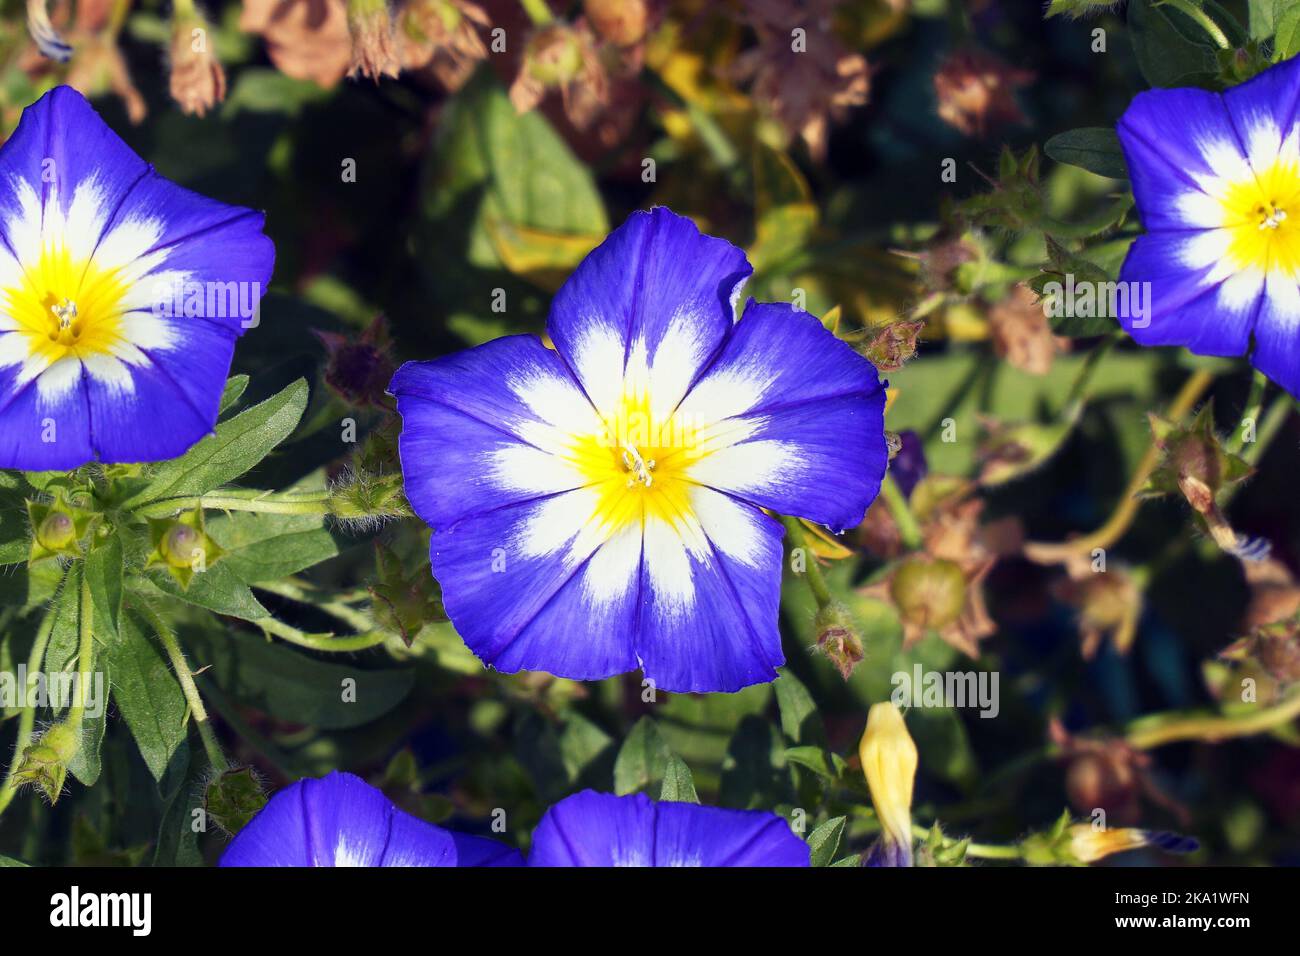 Blue flower morning glory or bindweed on the lawn in the flower garden. Convolvulus Tricolor Stock Photo